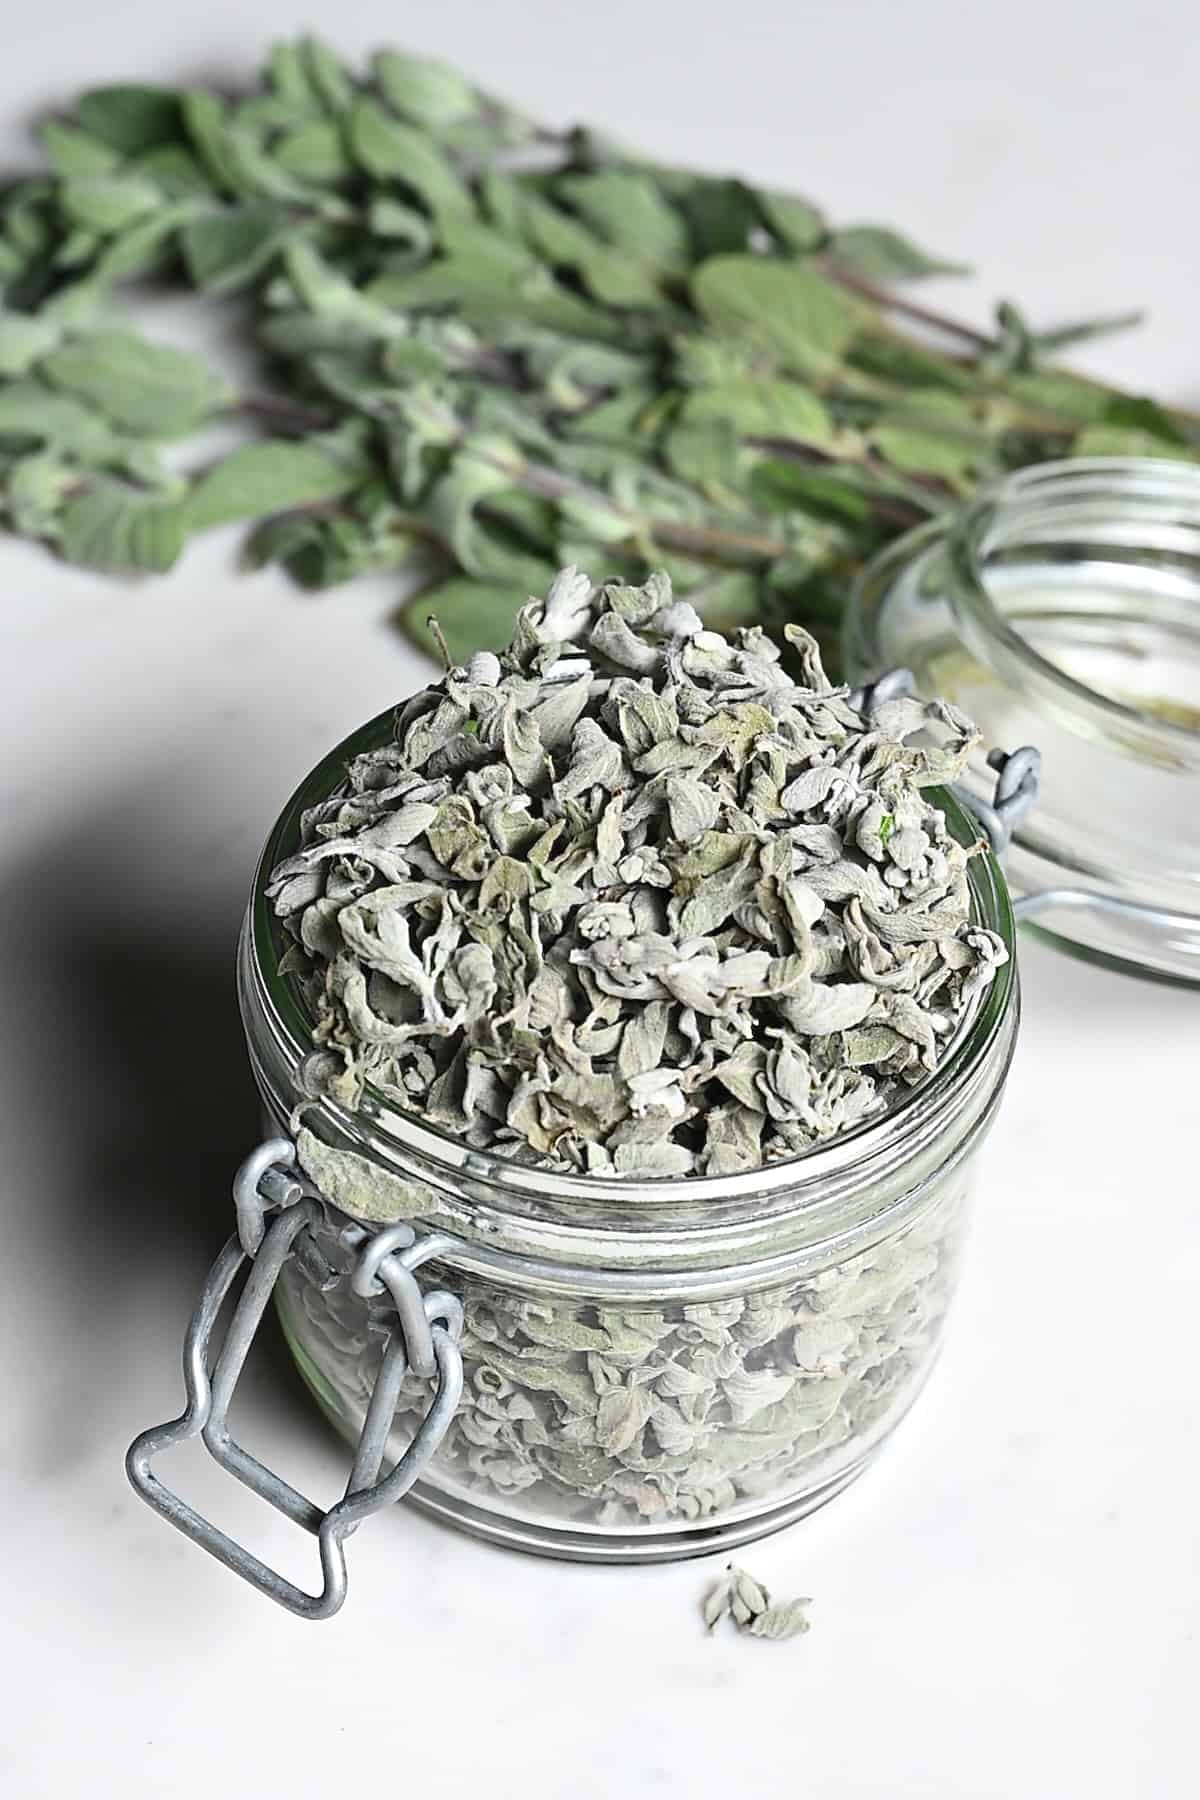 A jar with dried oregano leaves